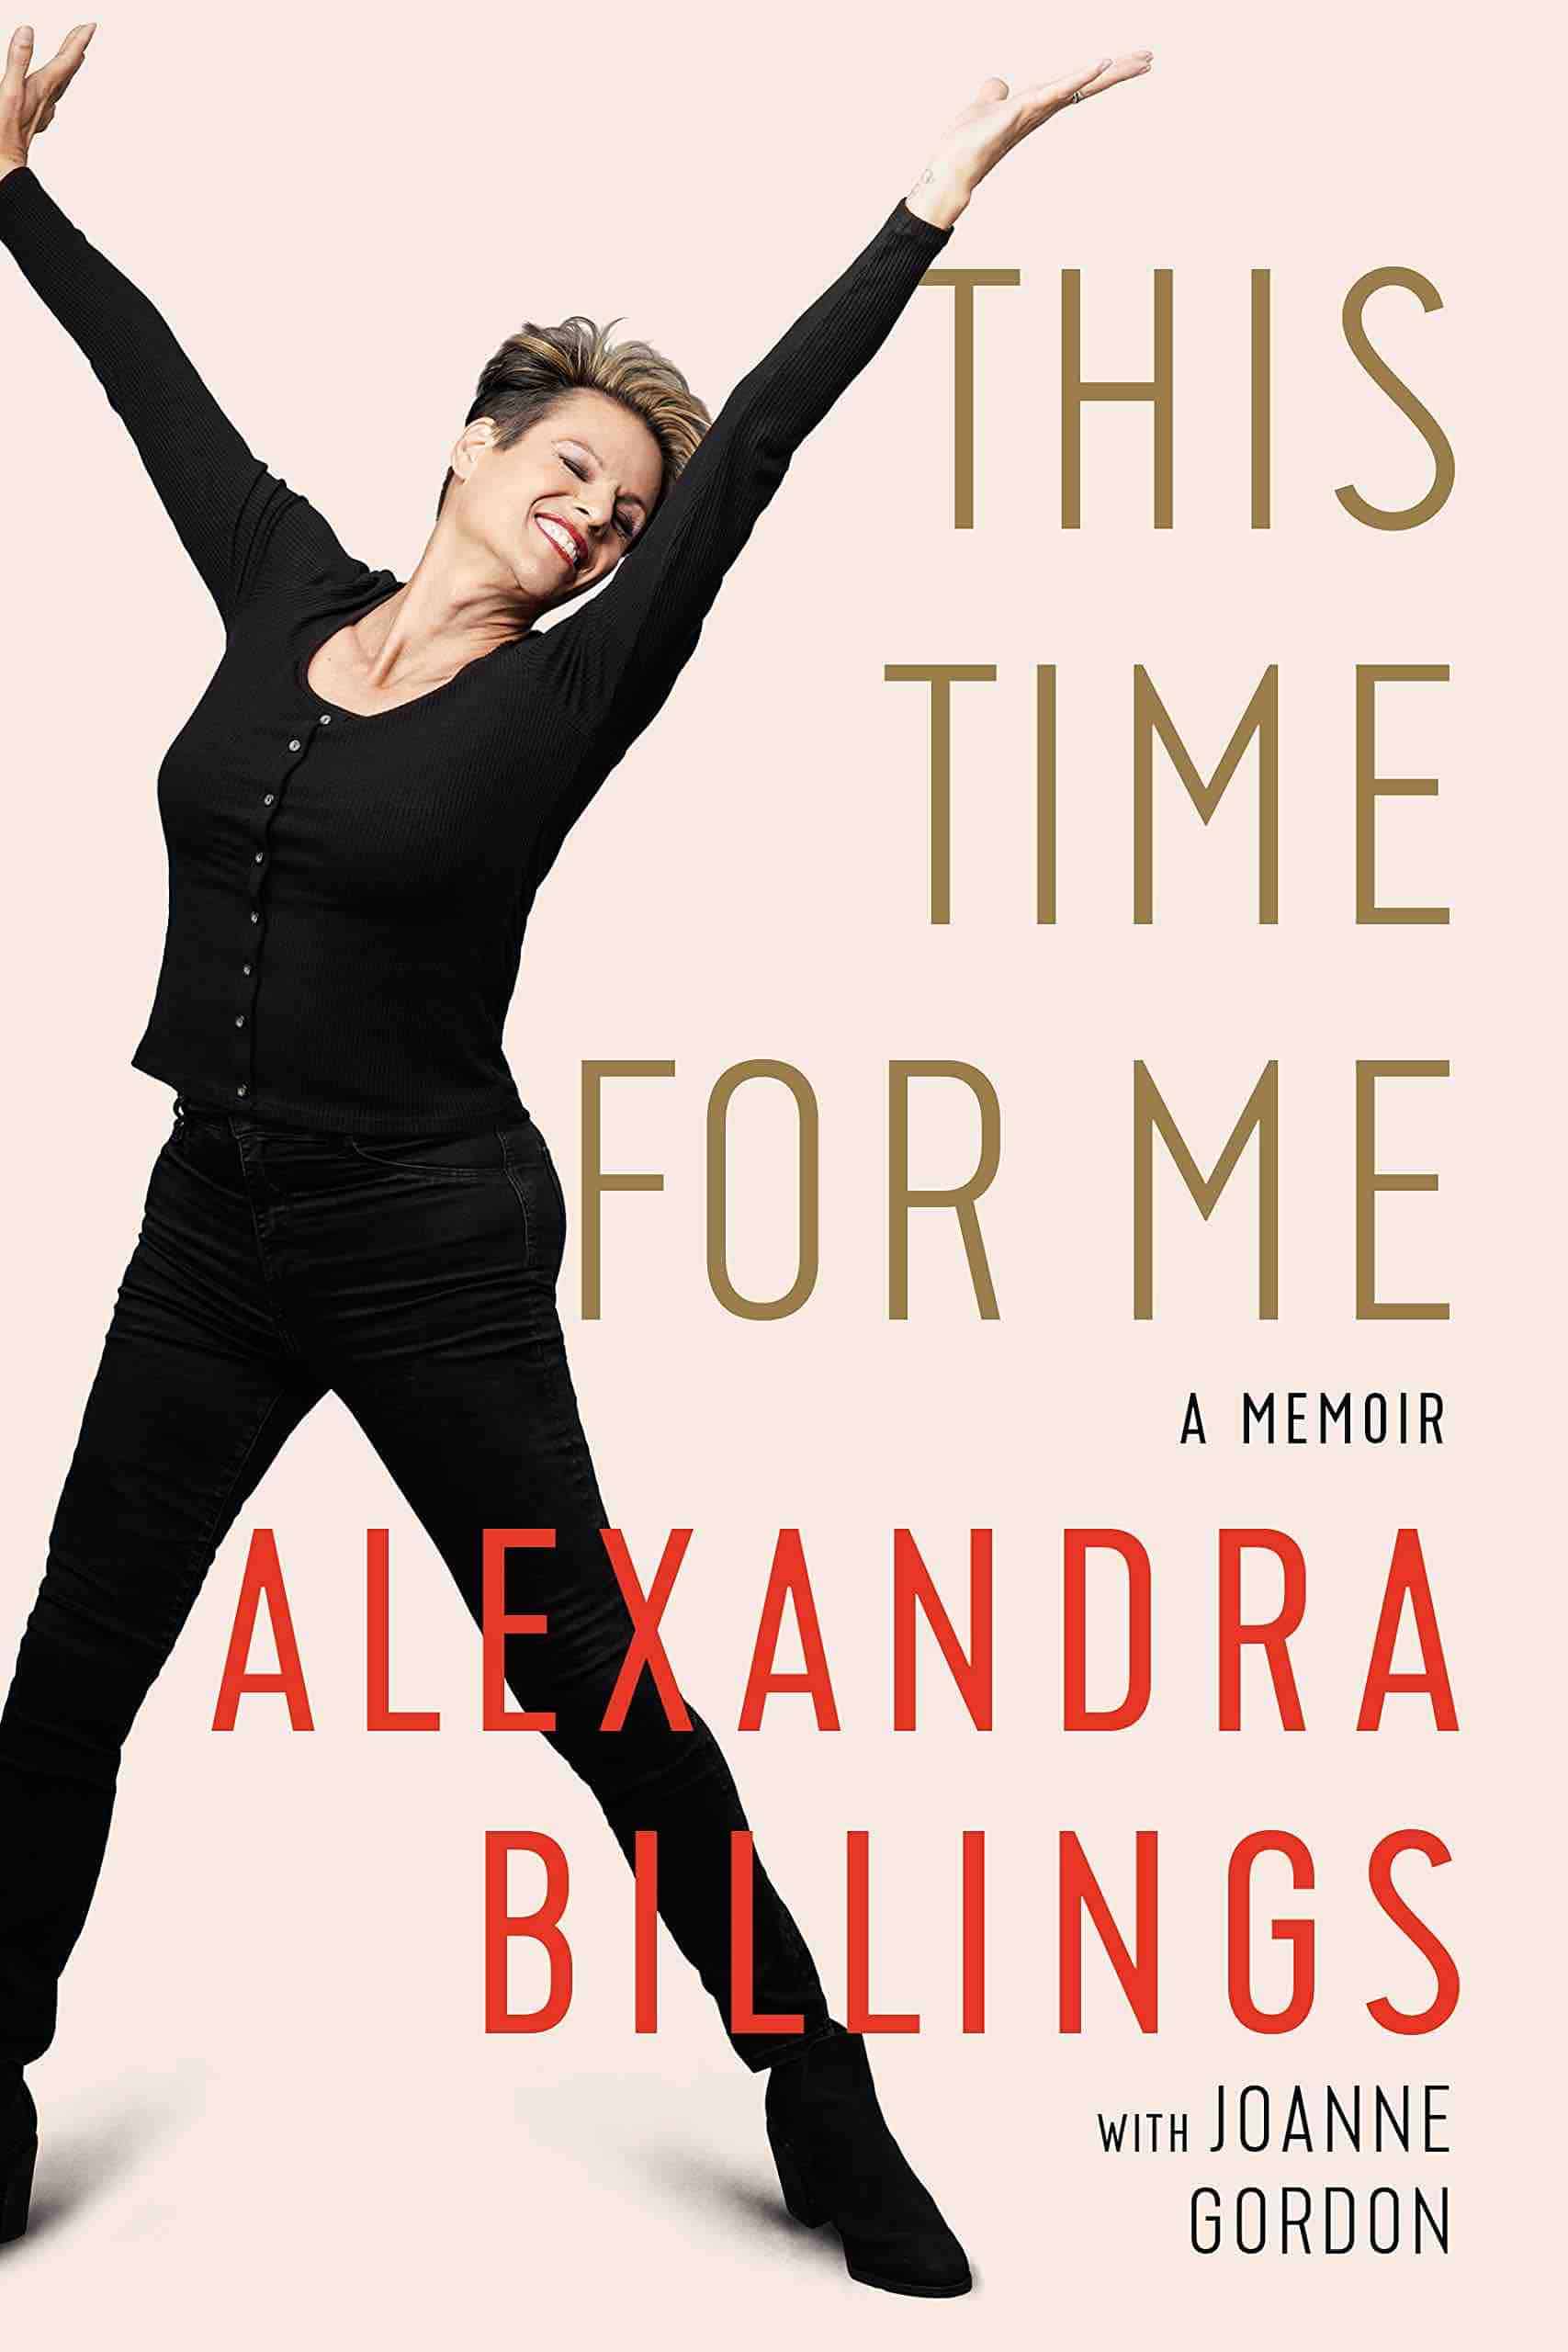 Cover Image_THIS TIME FOR ME_Alexandra Billings